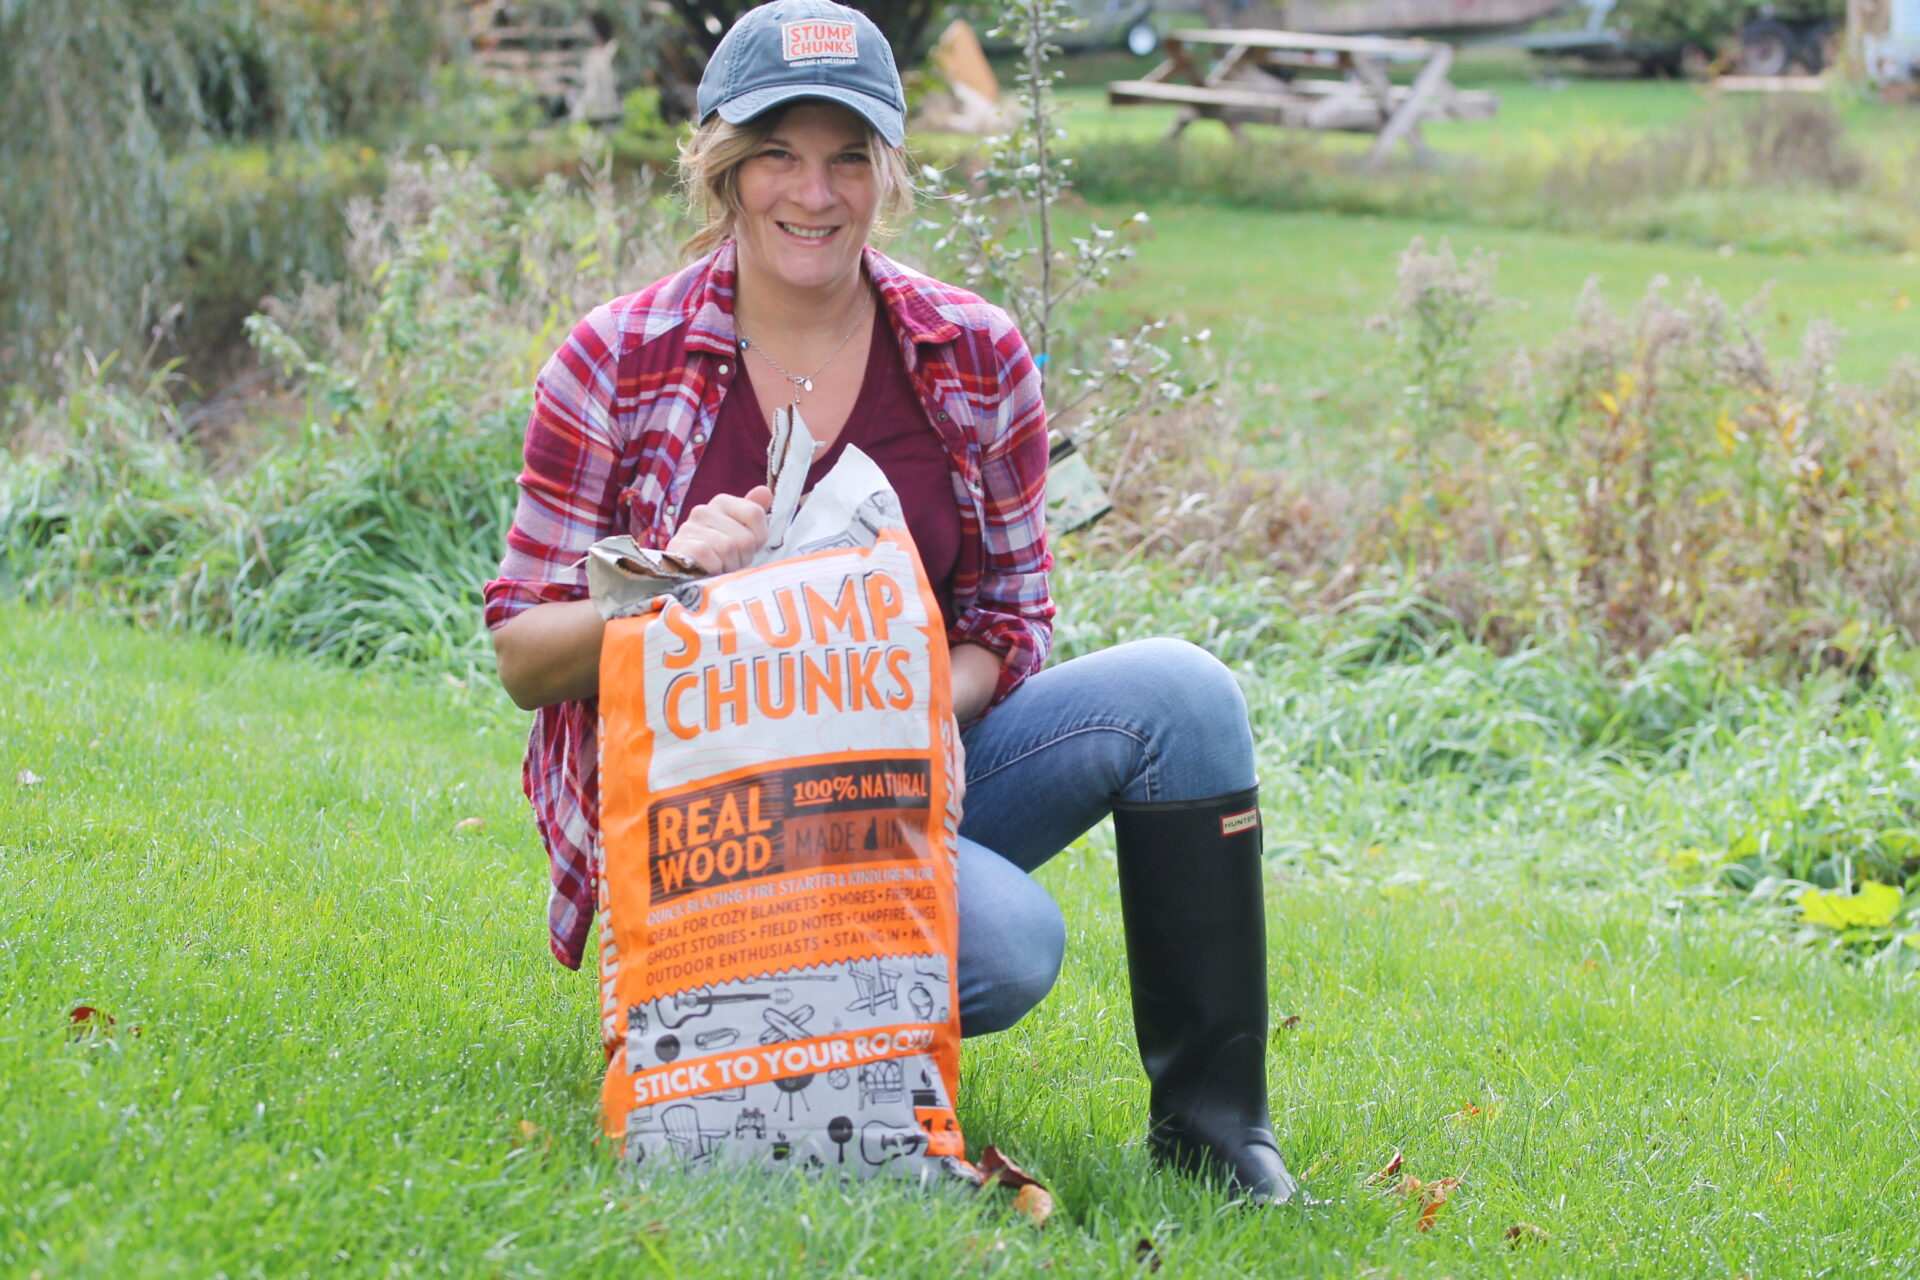 Stump Chunks – August Large Bag and Hat Contest Winner